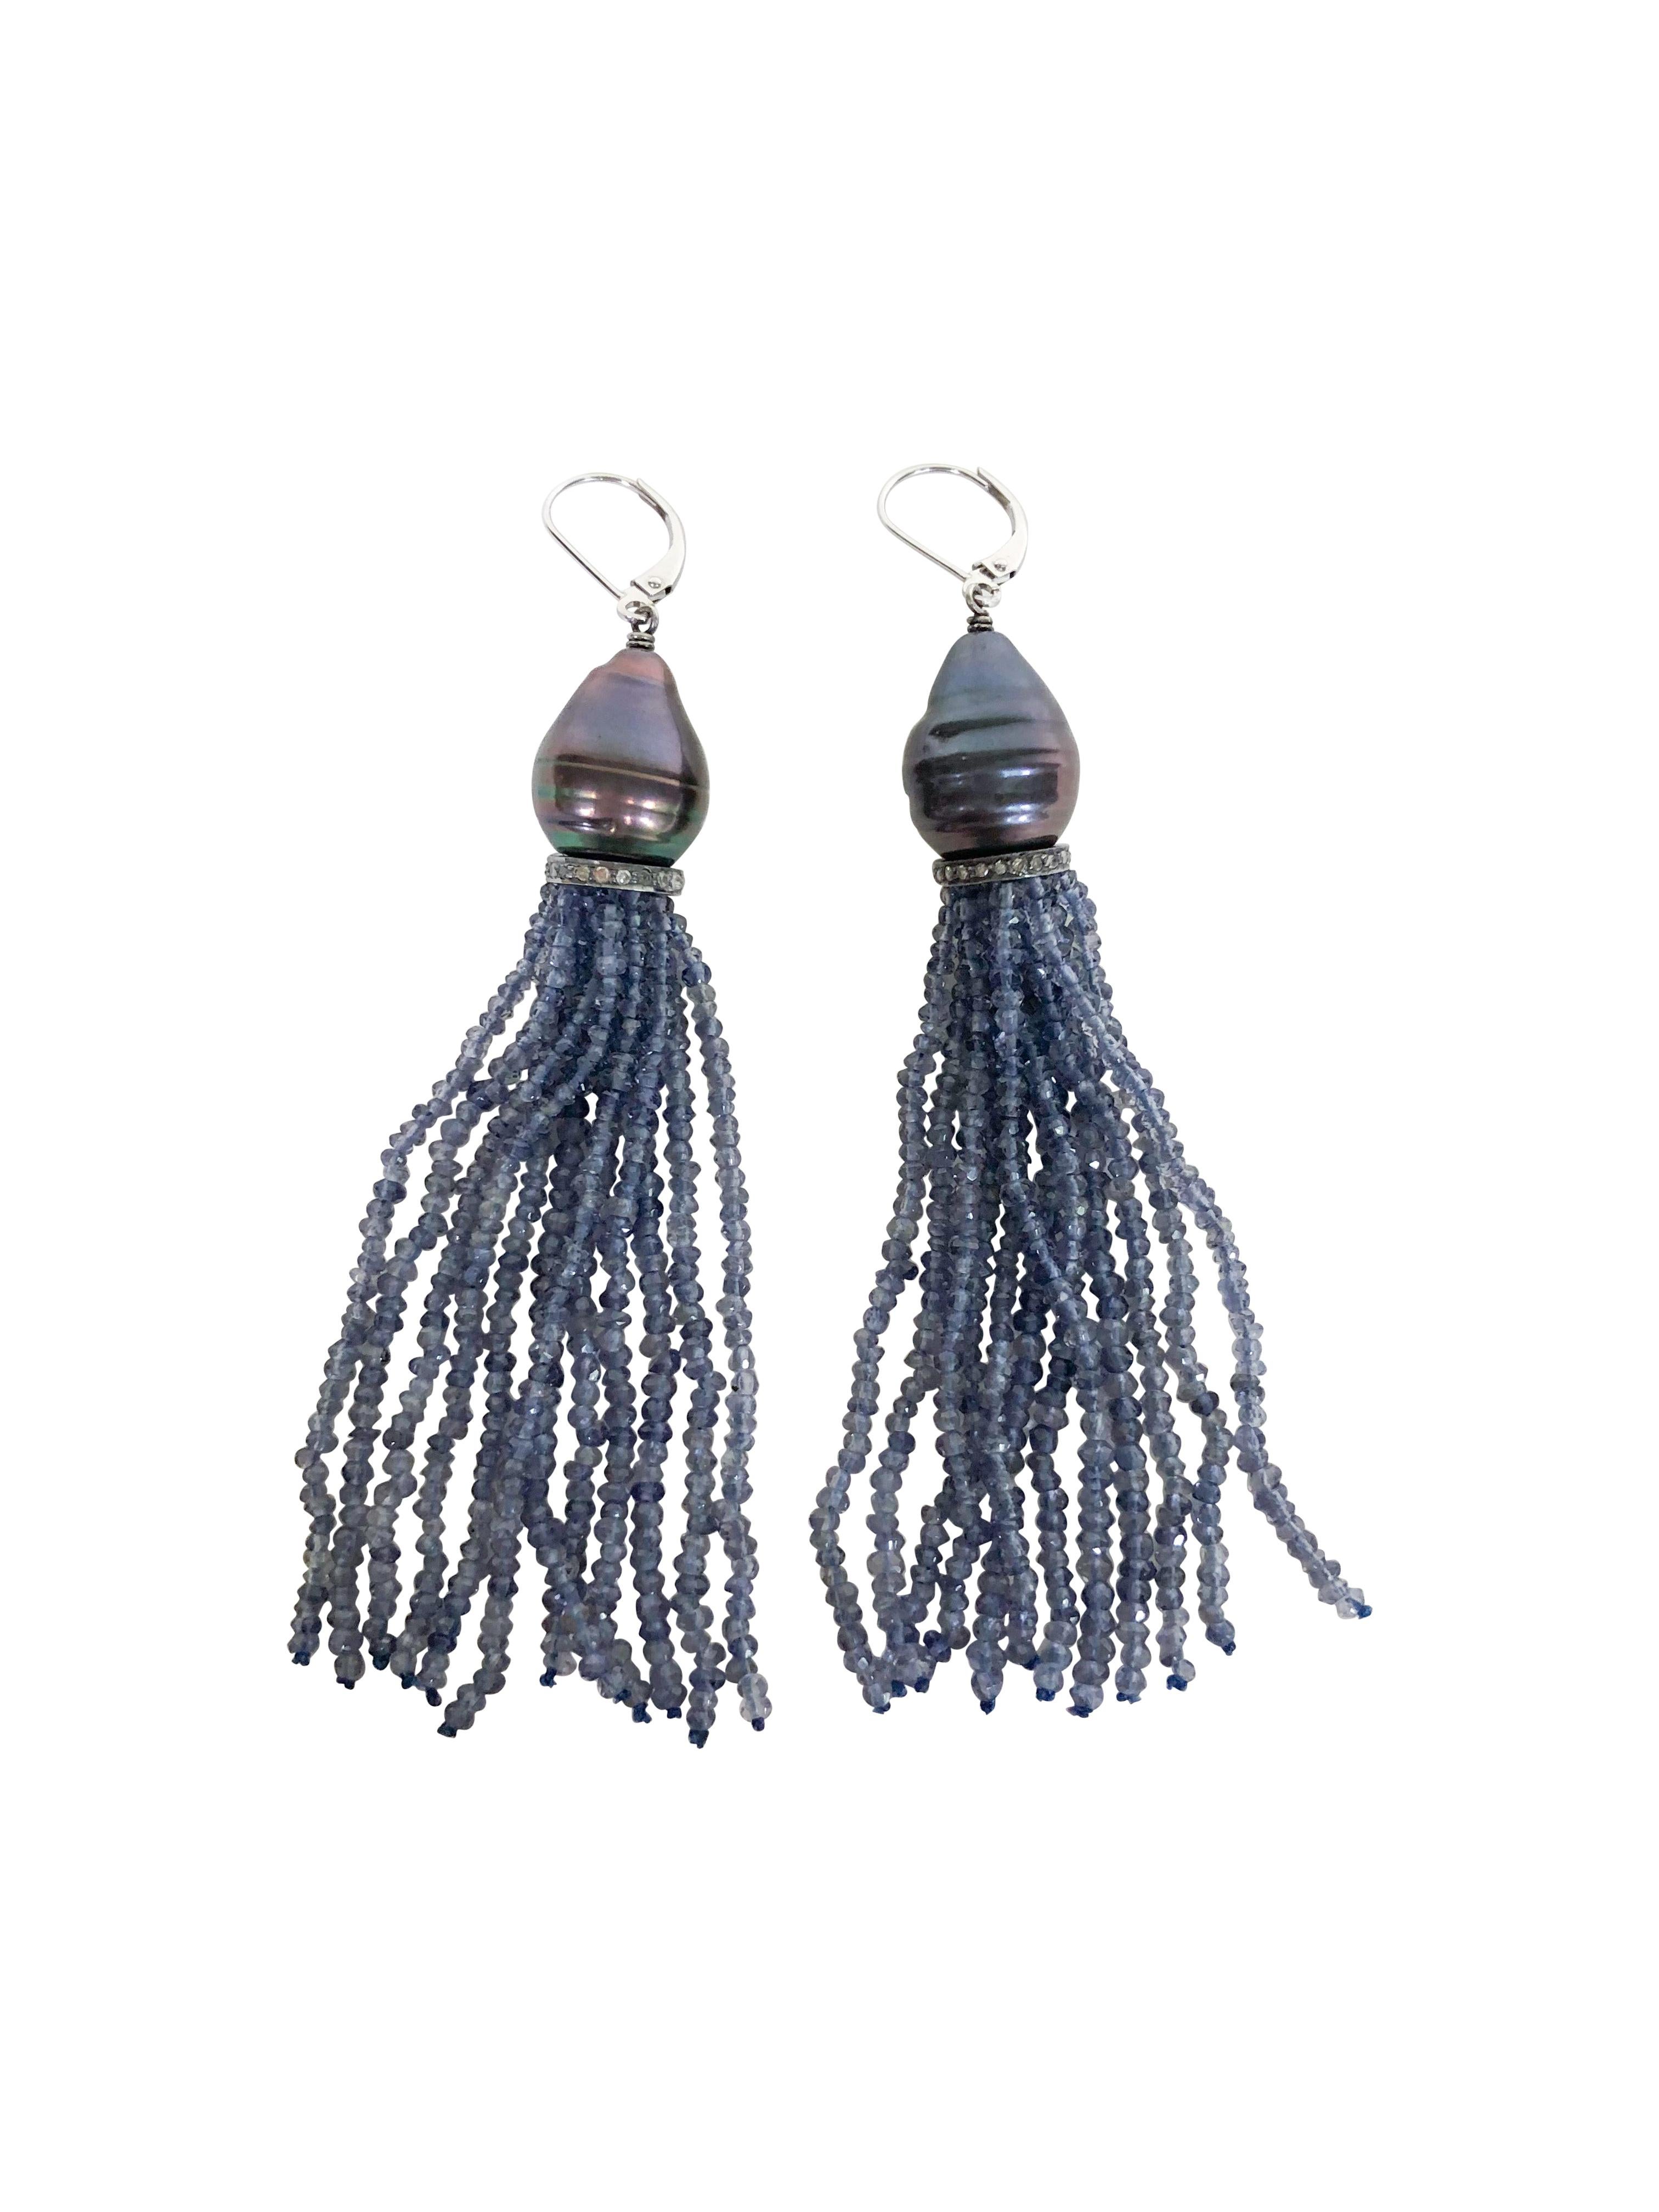 These sparkling and alluring handmade tassel earrings are made of iolite and black pearls. Faceted iolite beads hang from a large baroque black pearl and detailed with silver and diamond roundel. The faceted iolite catches the light beautifully,